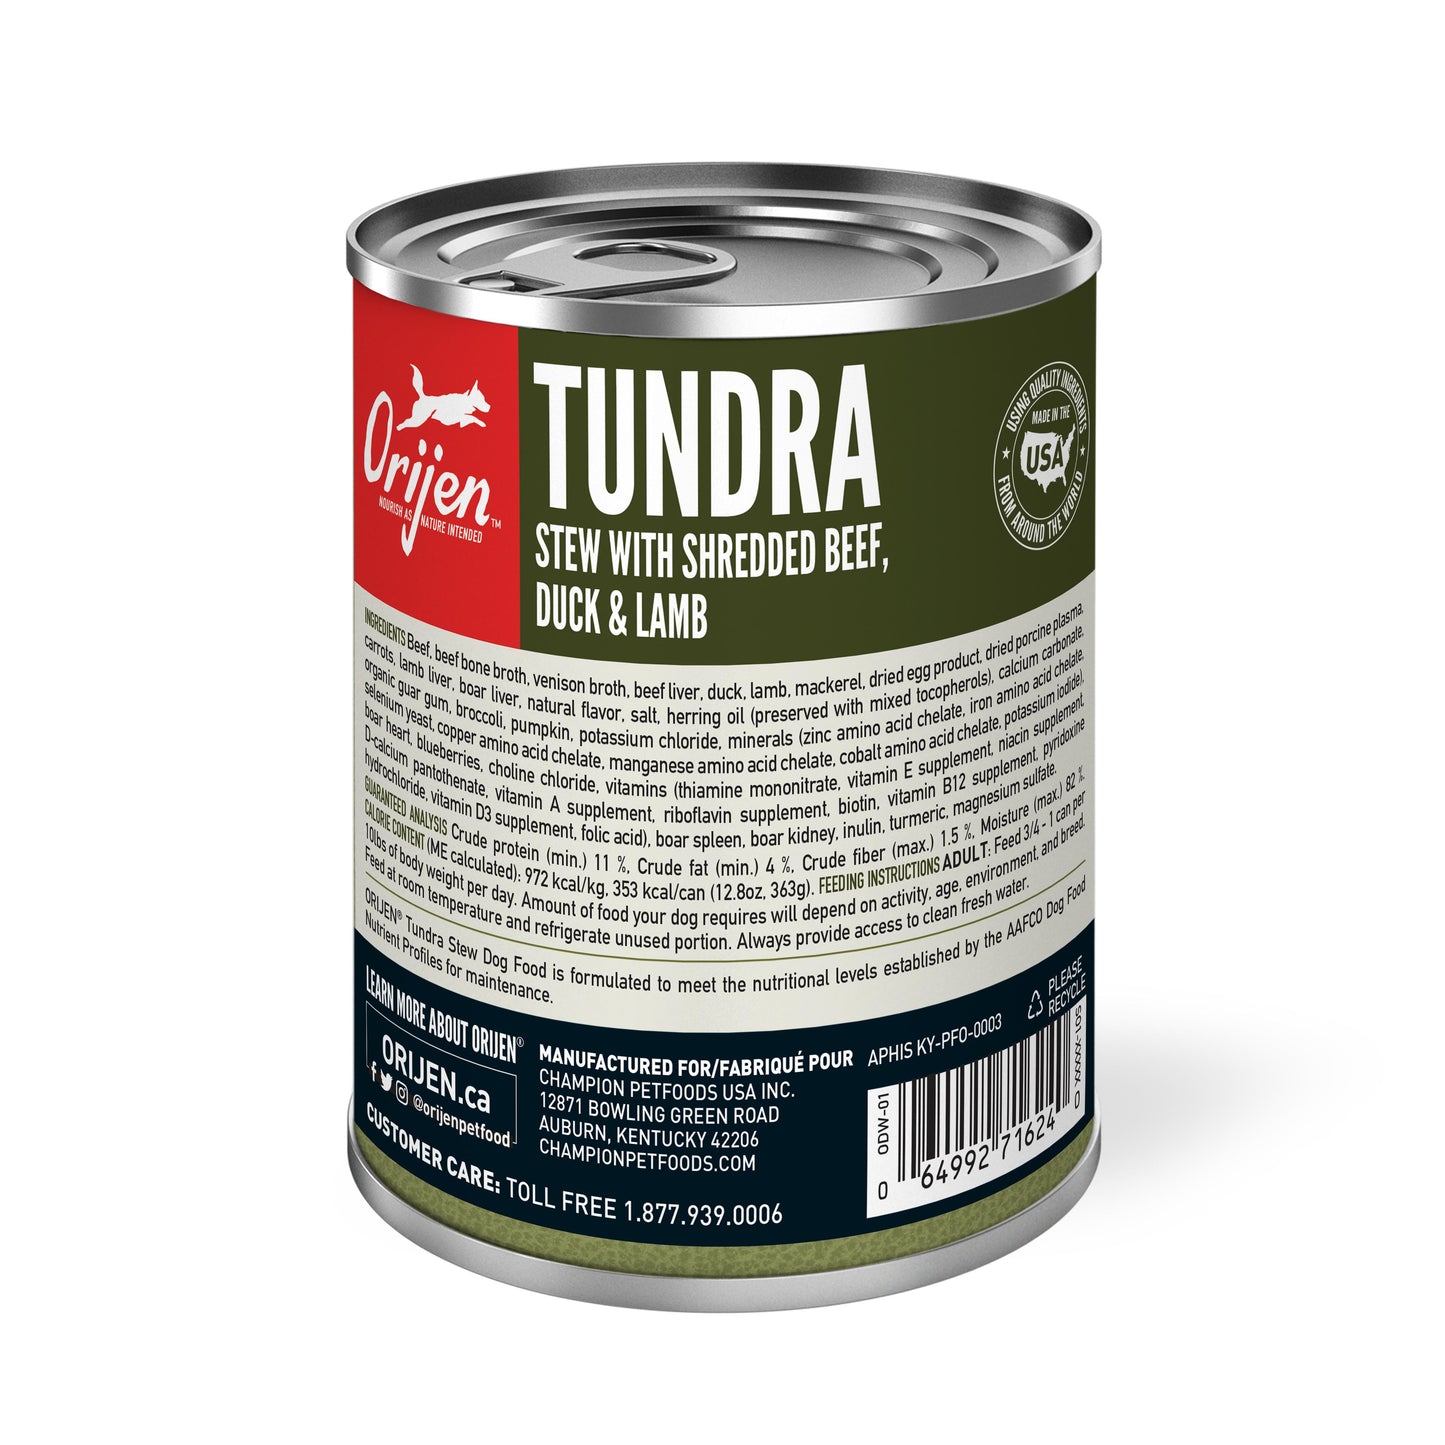 Orijen Premium Canned Dog Food | Tundra Stew with Shredded Beef, Duck & Lamb | 12.8 oz. Can